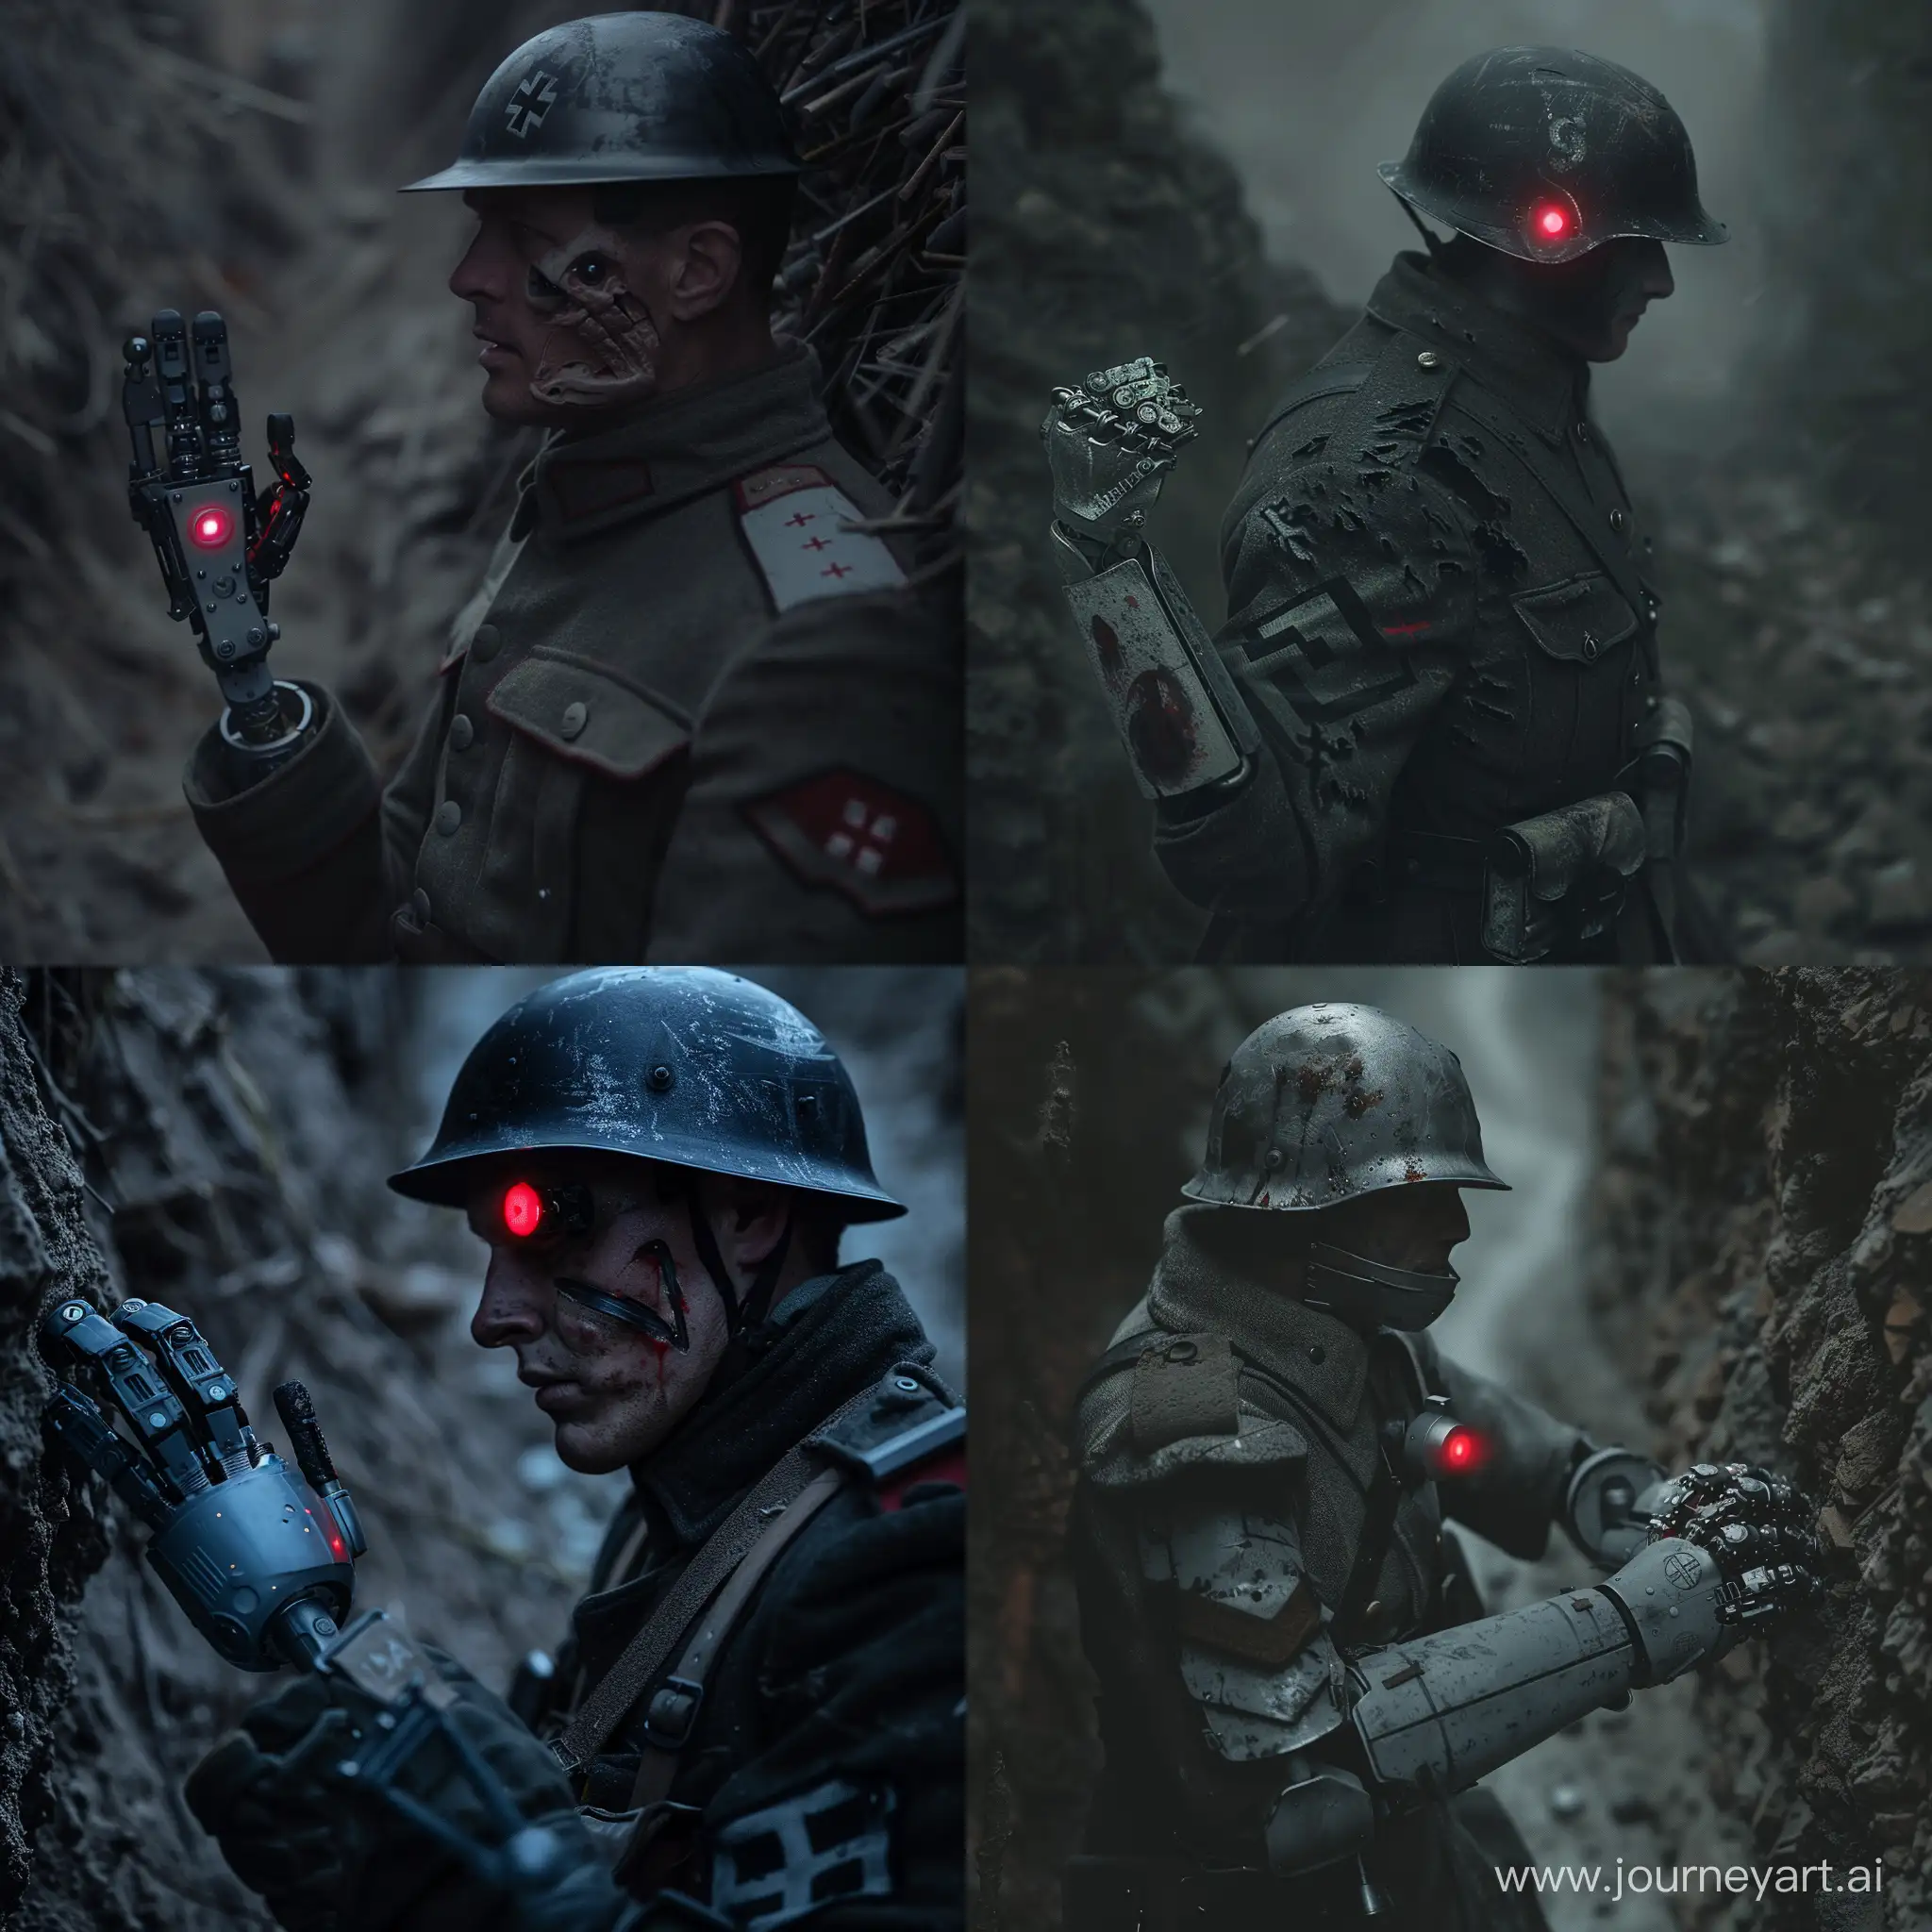 German-Soldier-with-Prosthetic-Hand-and-Red-Eye-Indicator-in-Trenches-of-World-War-I